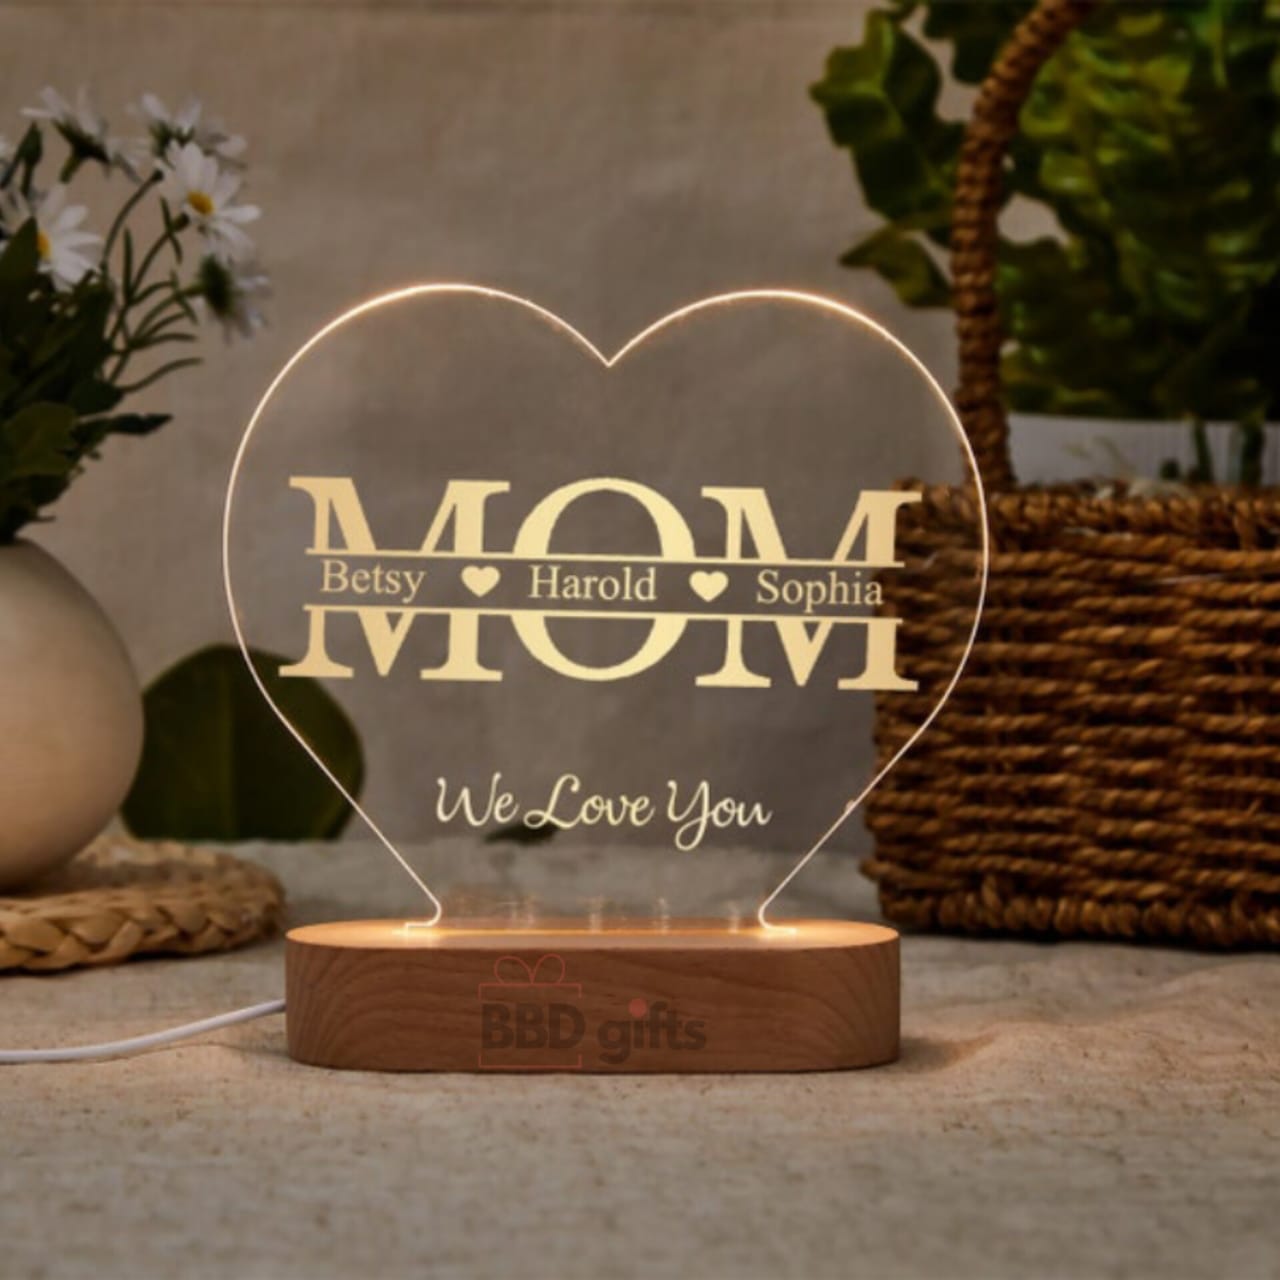 Personalised Gifts for Mom | Mother's Day Gift Ideas | Customized Gifts | Heart Night Light with Heart | Mother's day special